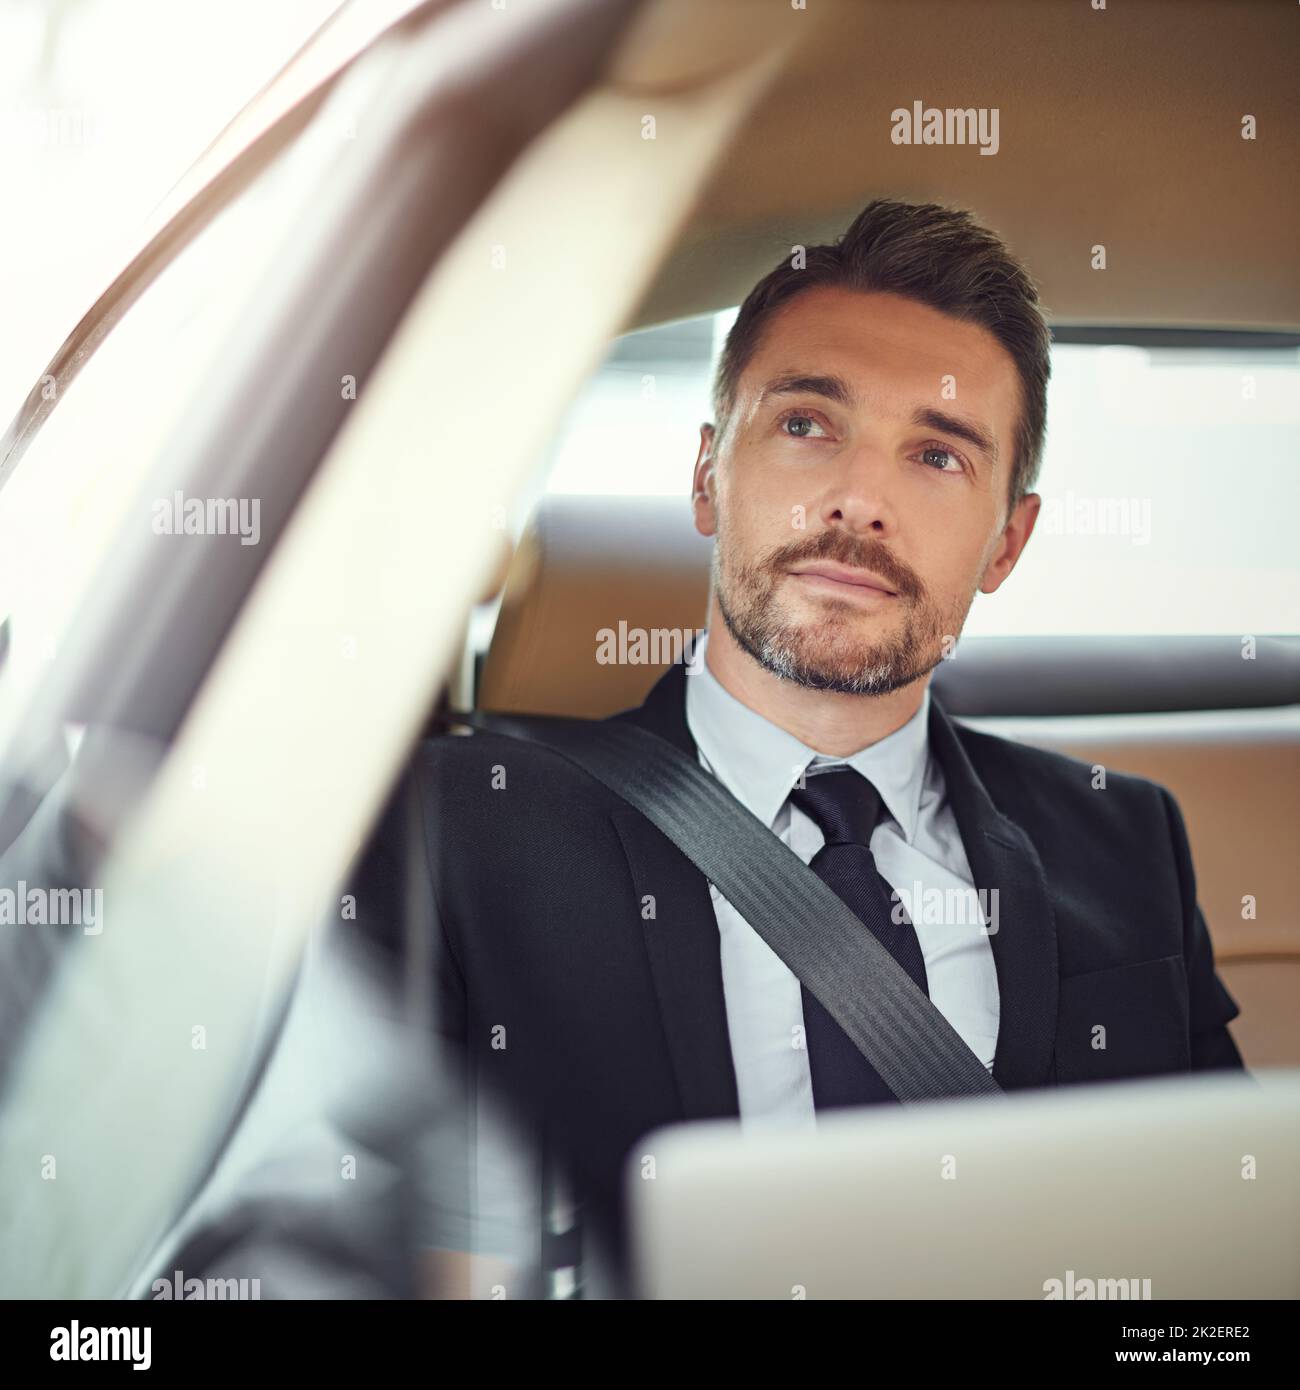 Thinking about the day ahead. Cropped shot of a businessman in the backseat of a car. Stock Photo